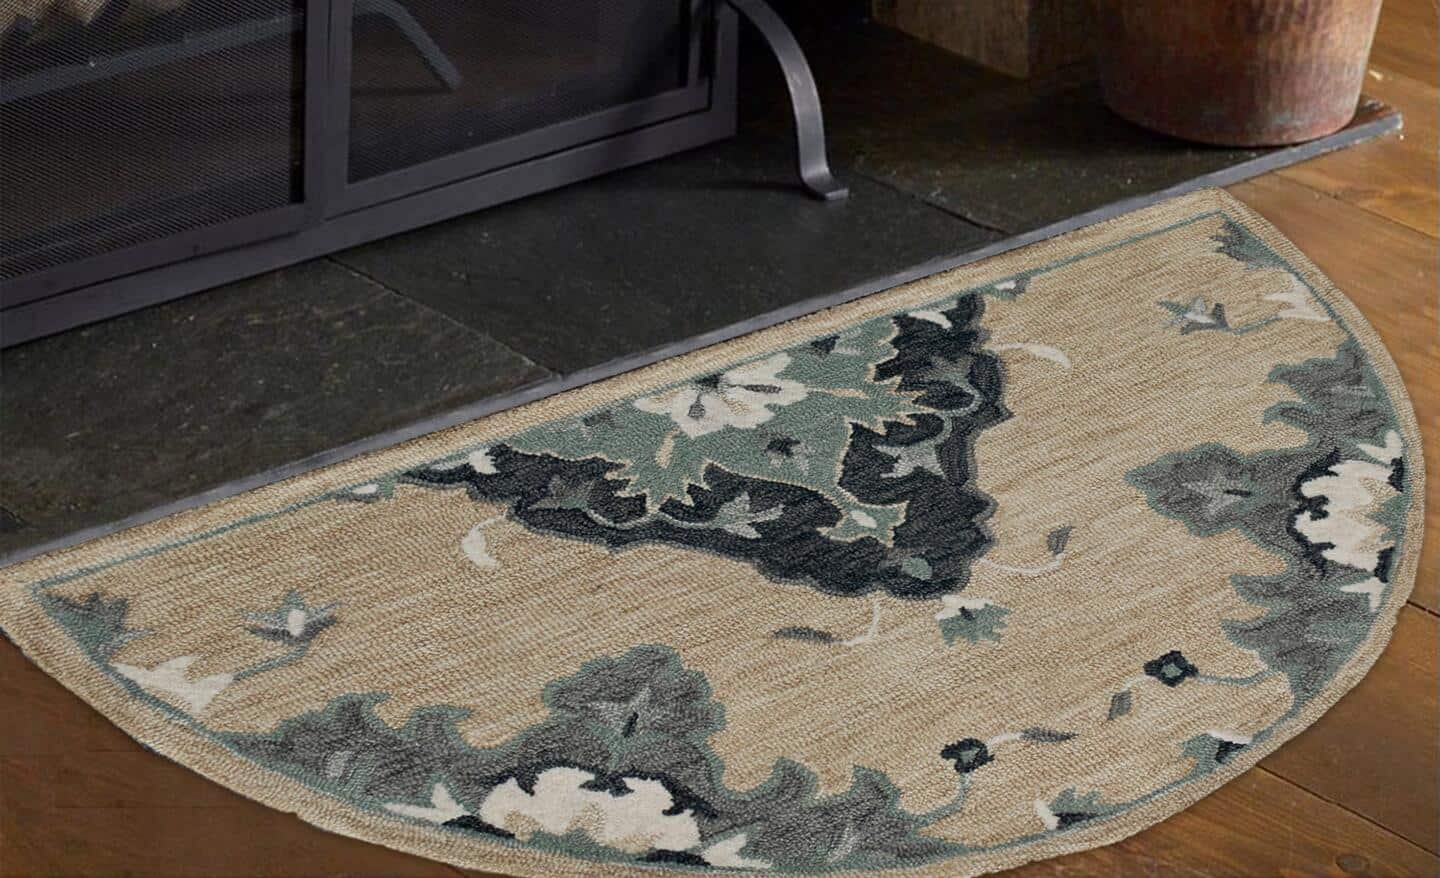 A hearth rug placed in front of a fireplace.